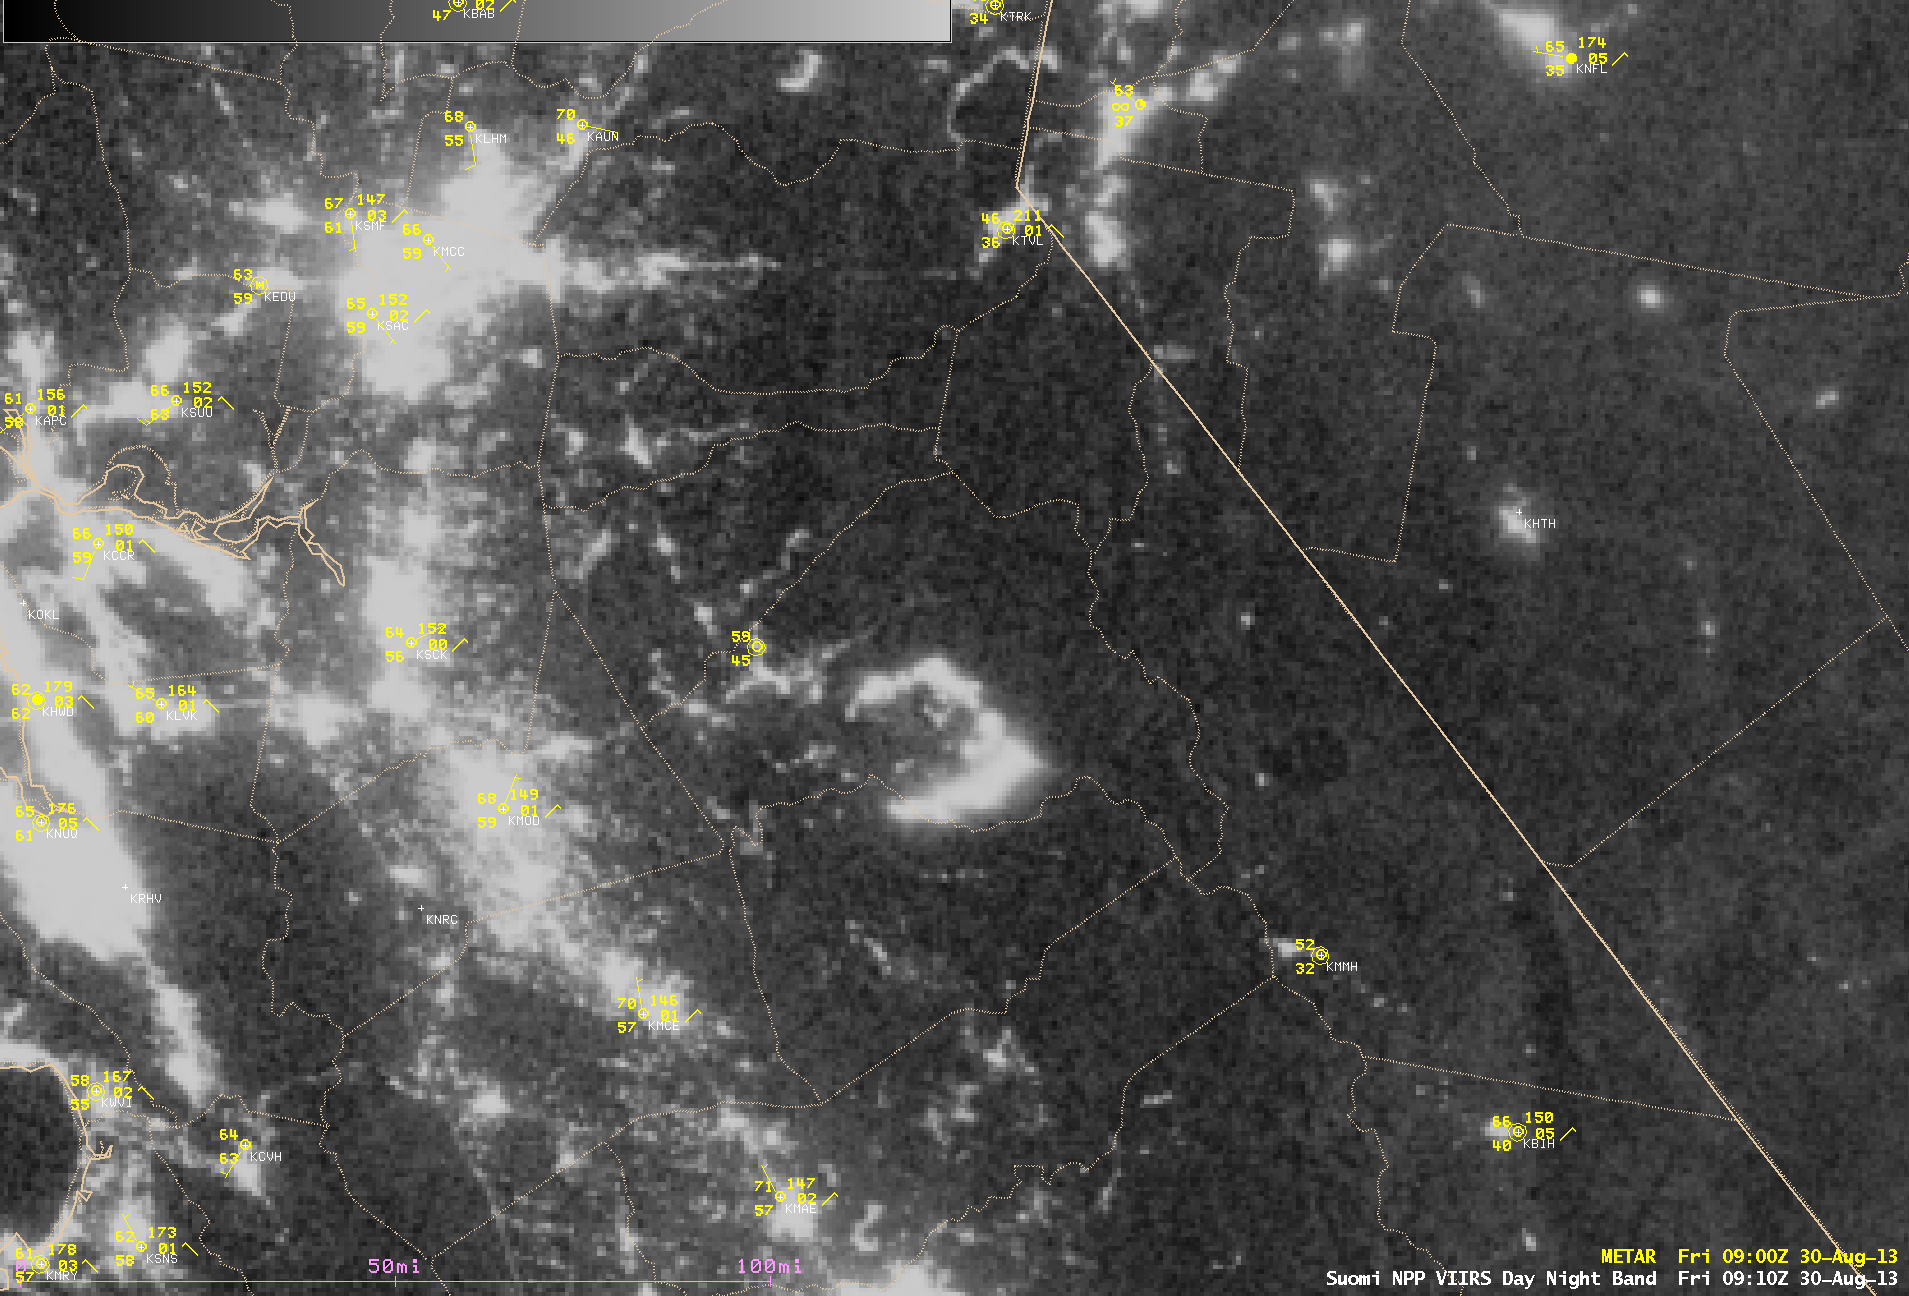 Suomi NPP VIIRS 0.7 Âµm Day/Night Band and 3.74 Âµm shortwave IR images (30 August)